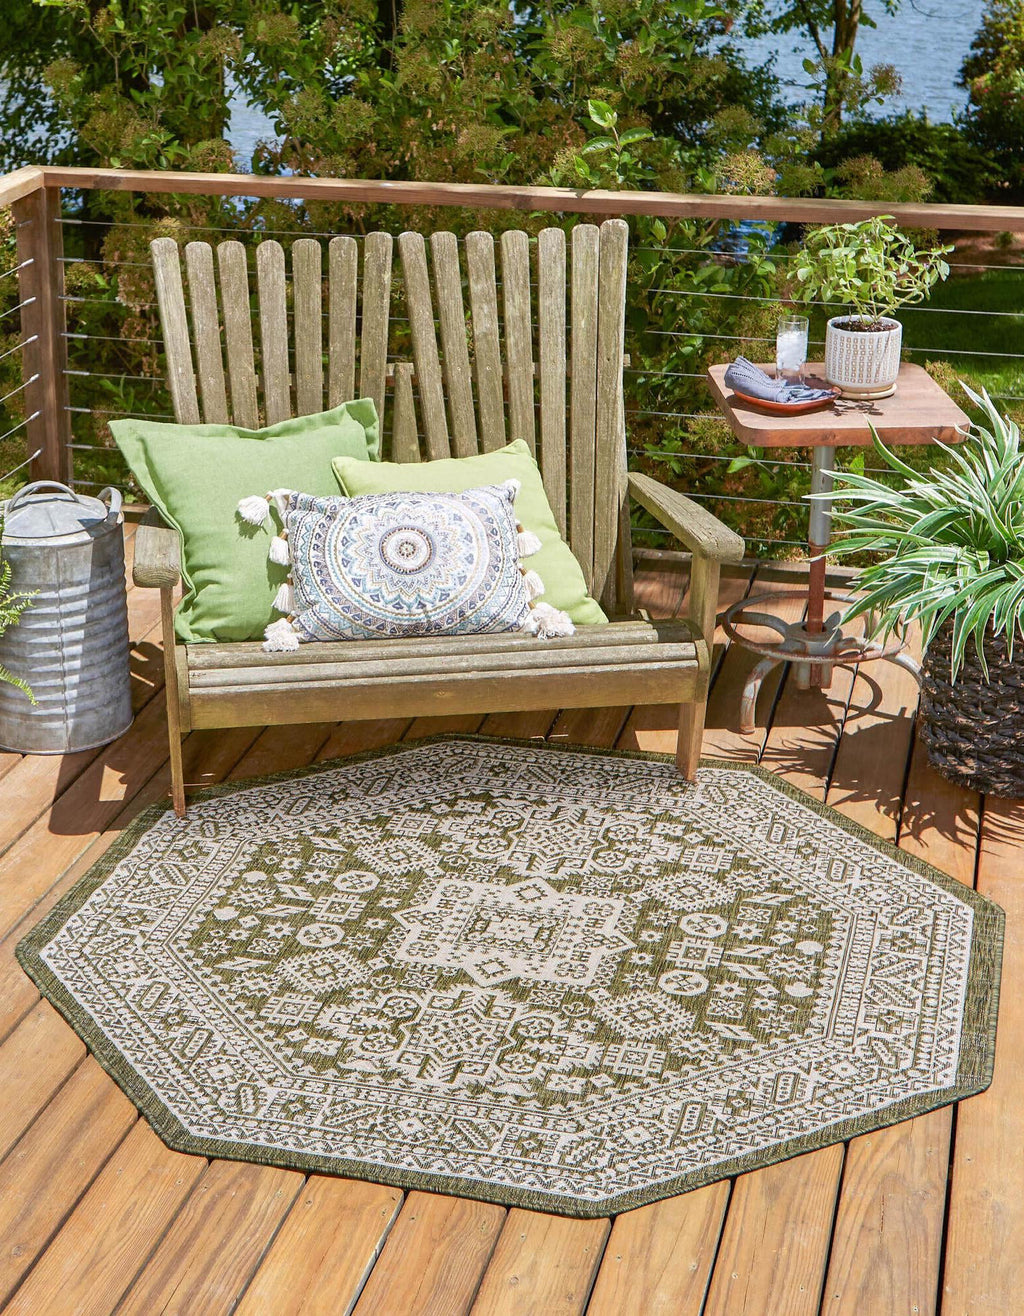 Unique Loom Outdoor Aztec T-KZOD17 Green Area Rug Octagon Lifestyle Image Feature